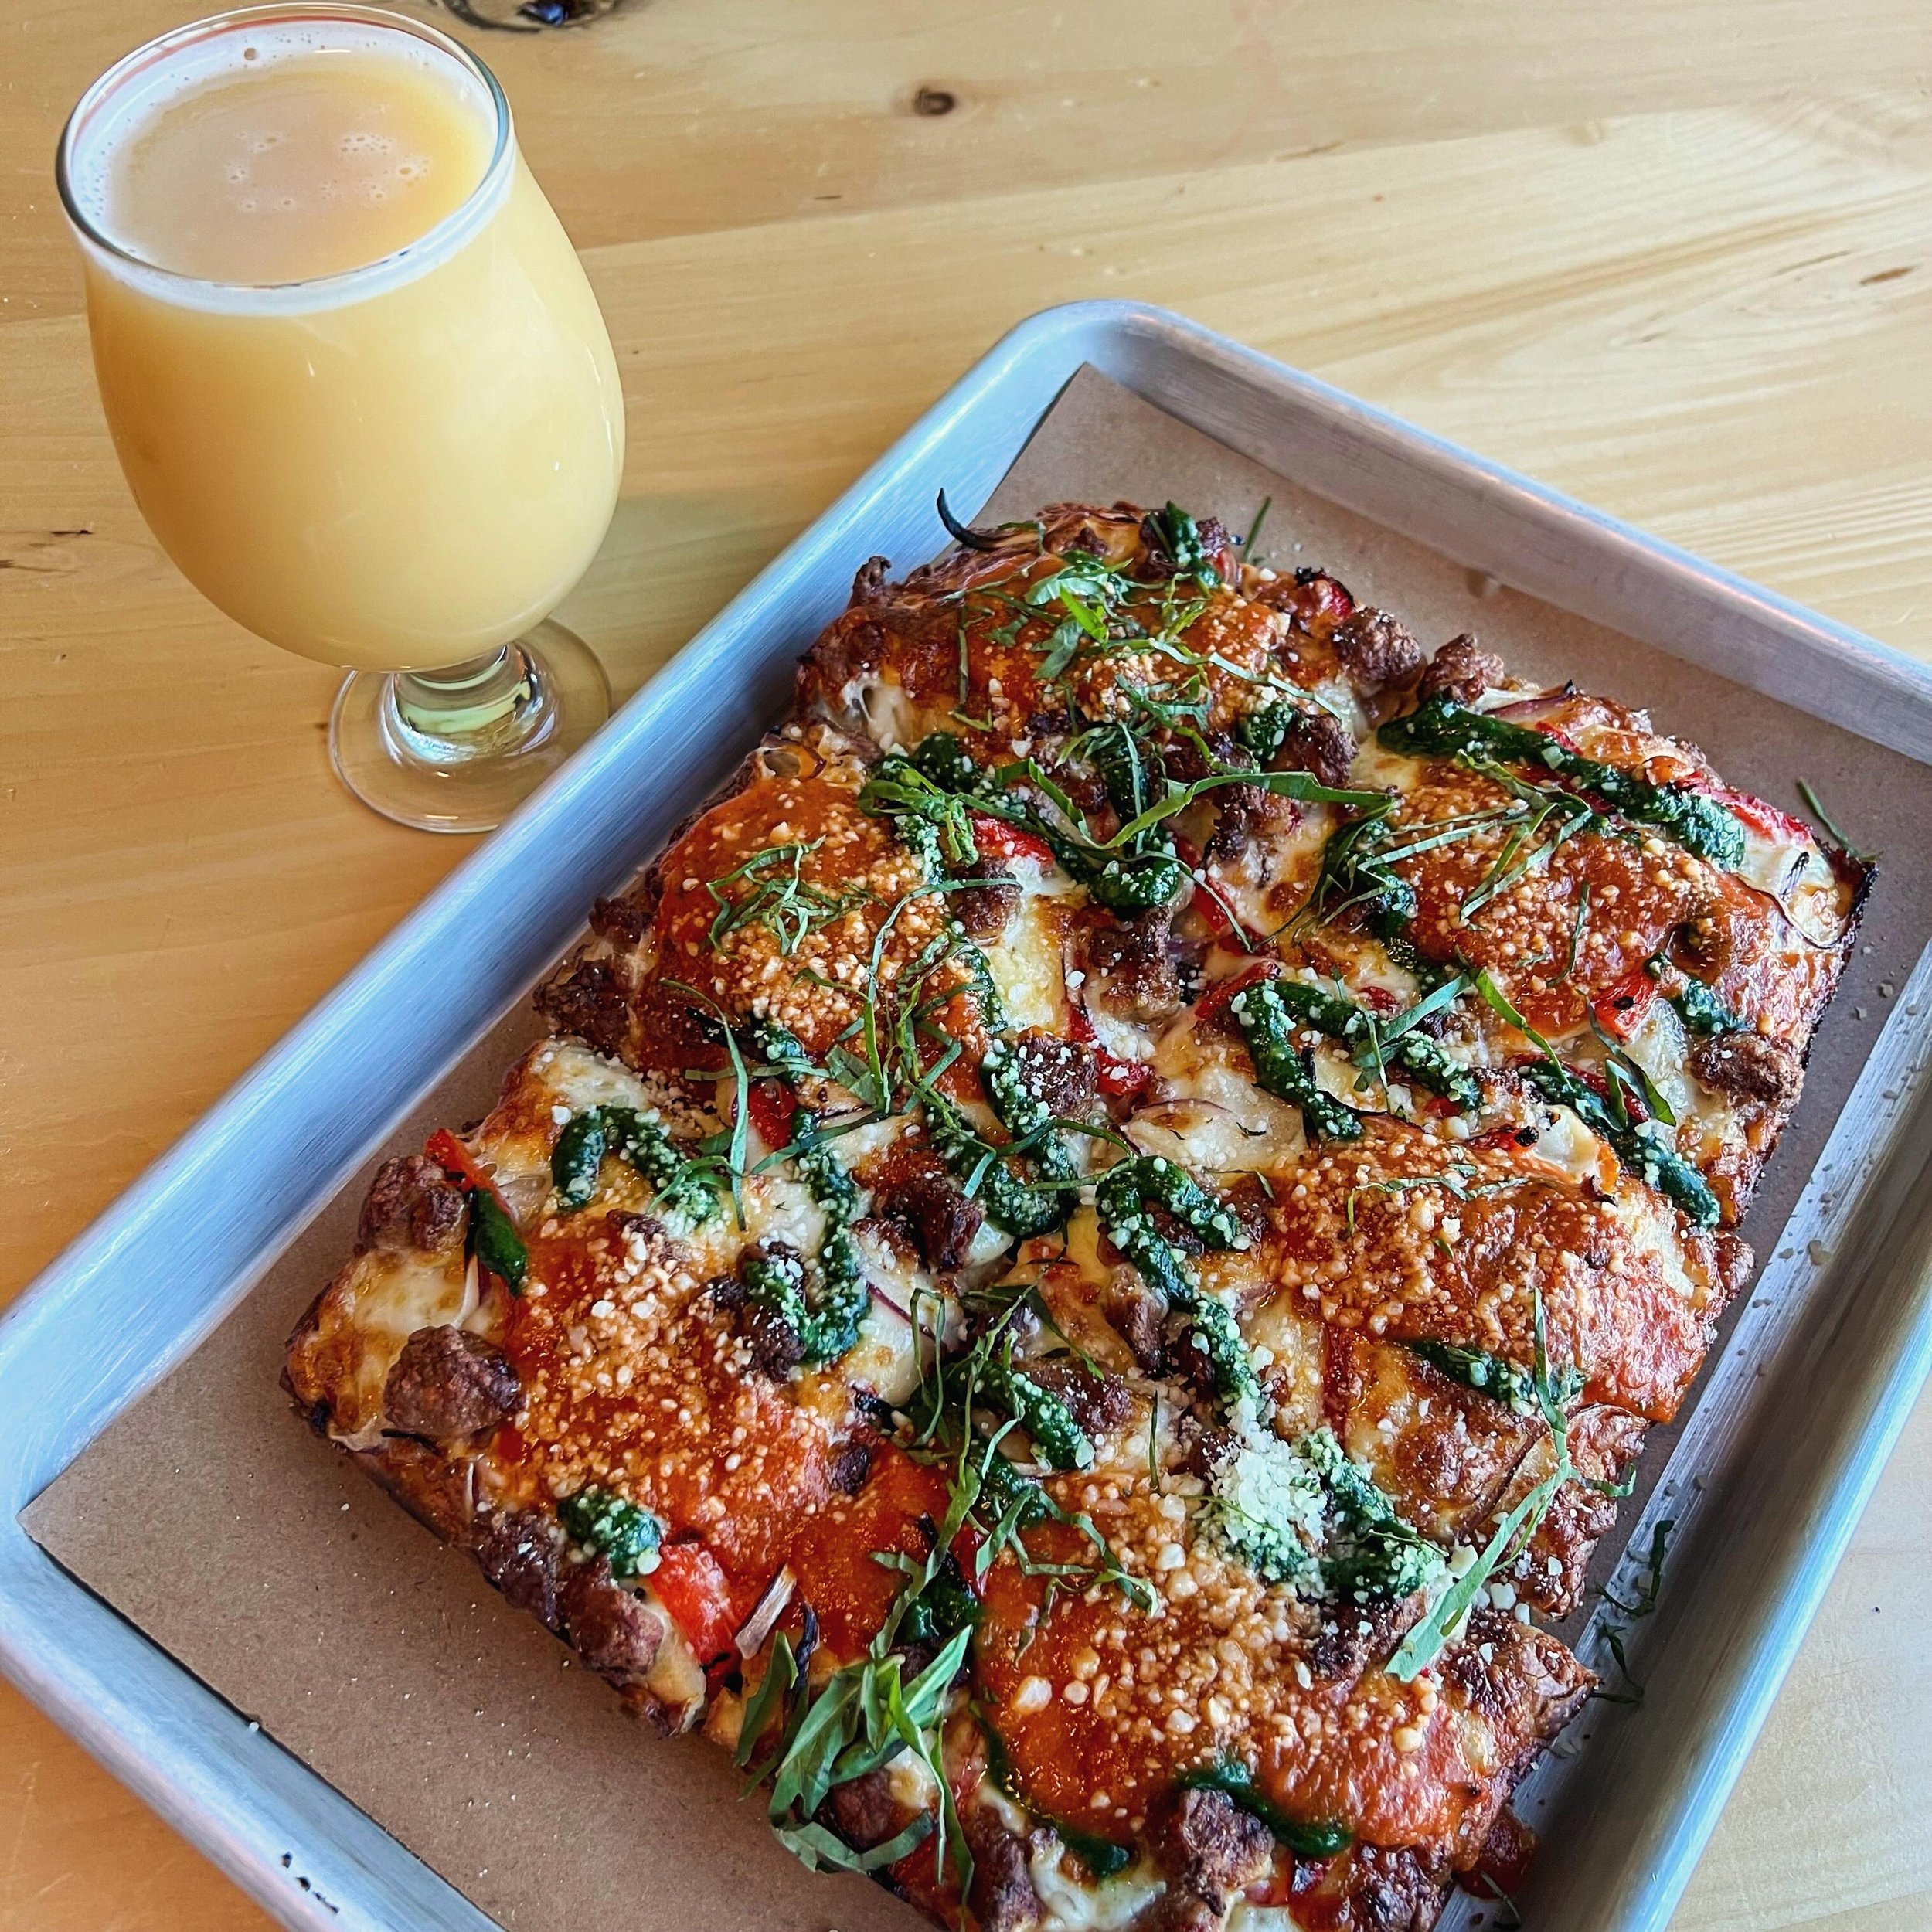 Tuesday Pizza Party!

🍕Chef Special Pizza - Sausage, Pepper &amp; Onion - crumbled hot Italian sausage, roasted red peppers, onion, red sauce, and a spinach pesto

Pair your Pizza Pie with Aspect Oriented
An 8.3% DIPA hopped with Citra, Galaxy and M